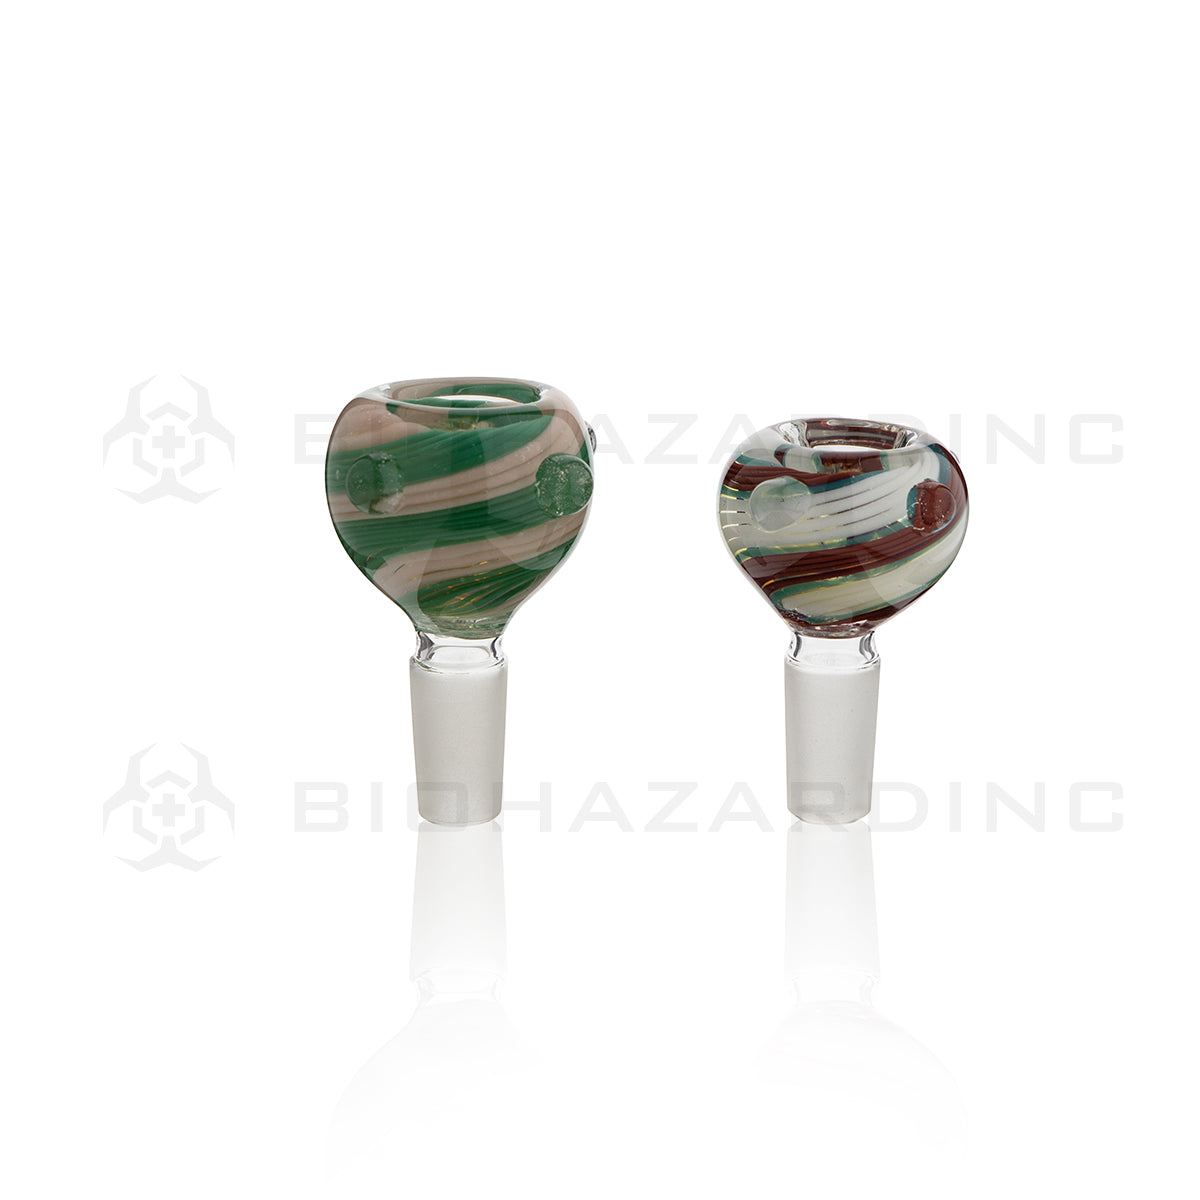 Bowl | Candy Cane Swirl Frit Bowl | 14mm - Assorted Colors 5 Count Glass Bowl Biohazard Inc   